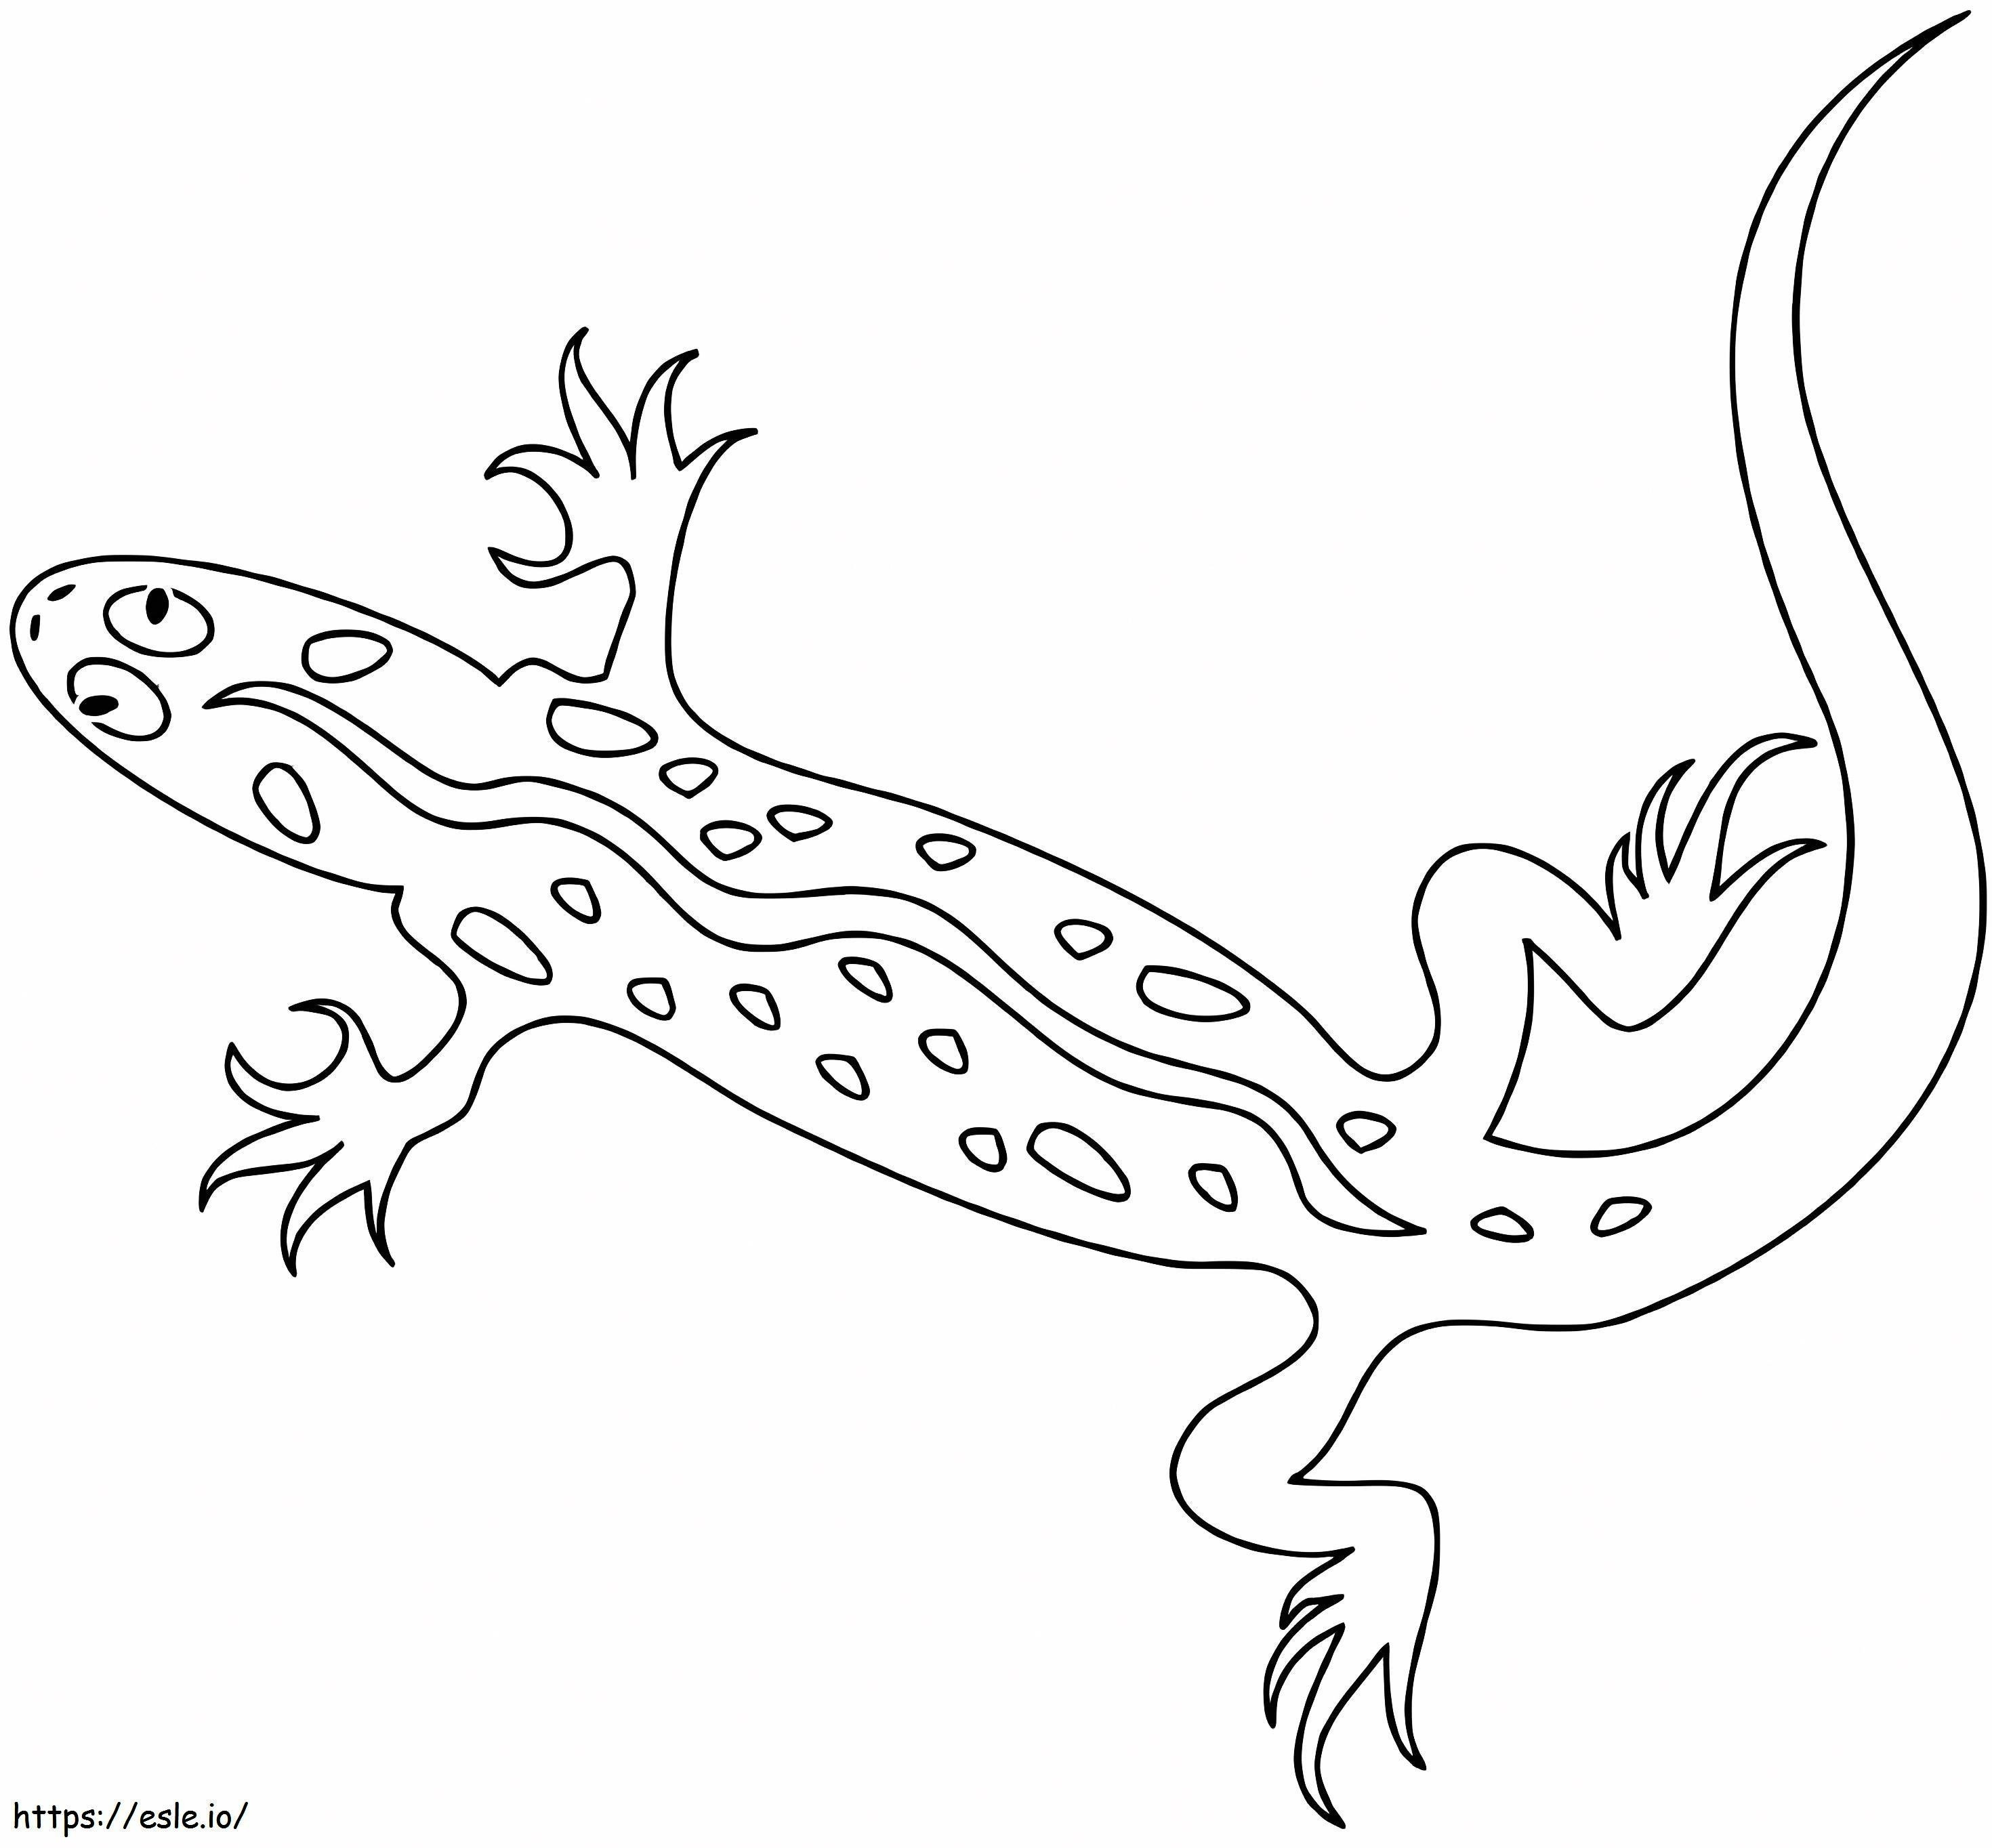 Lizard 1 coloring page